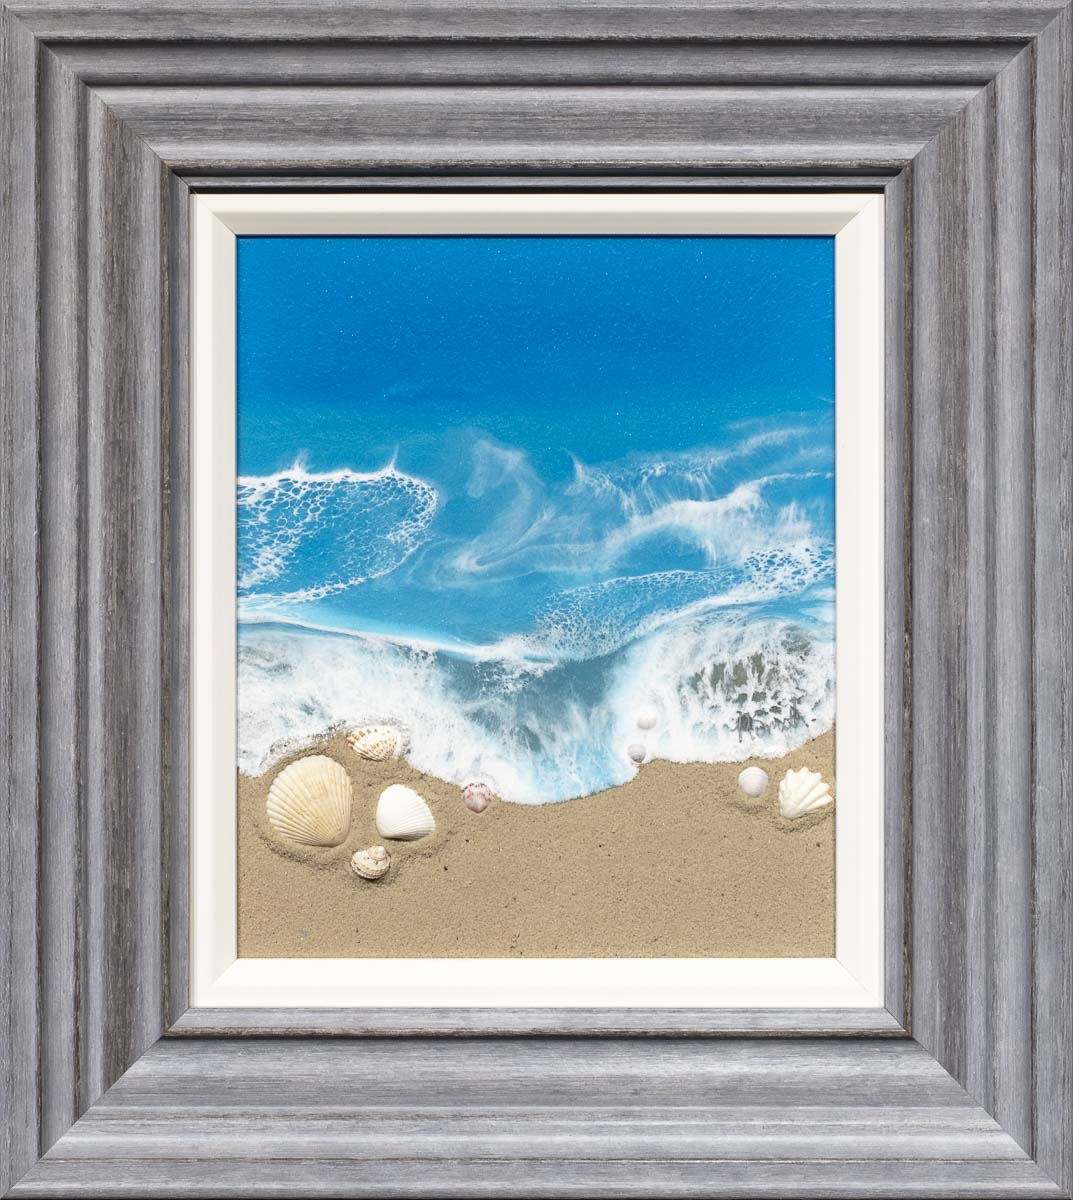 At the Seaside - Original Michelle Smith Framed